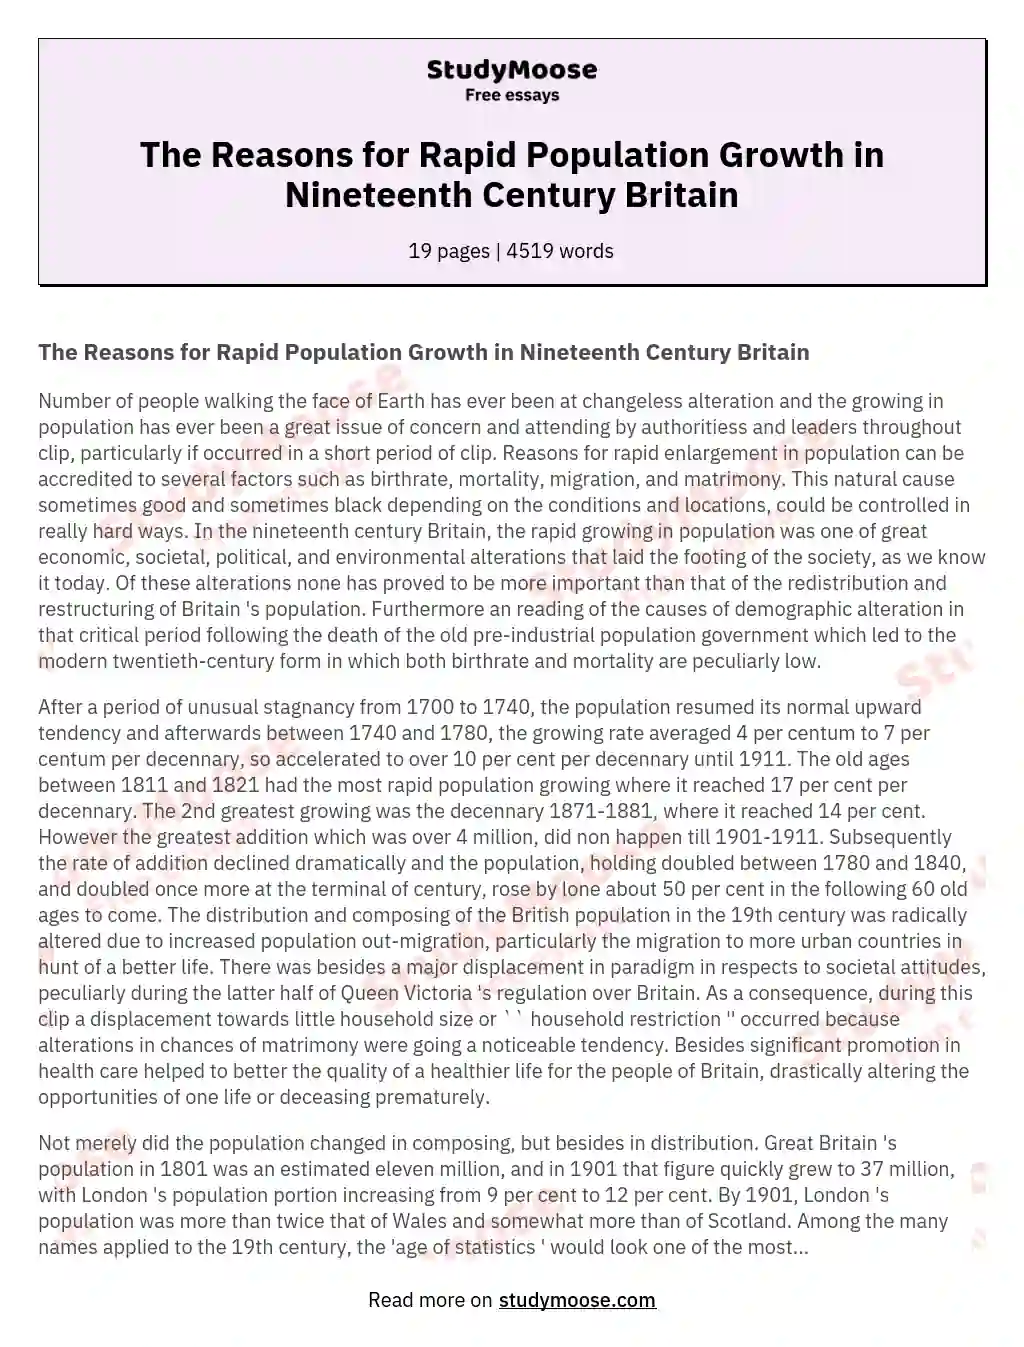 The Reasons for Rapid Population Growth in Nineteenth Century Britain